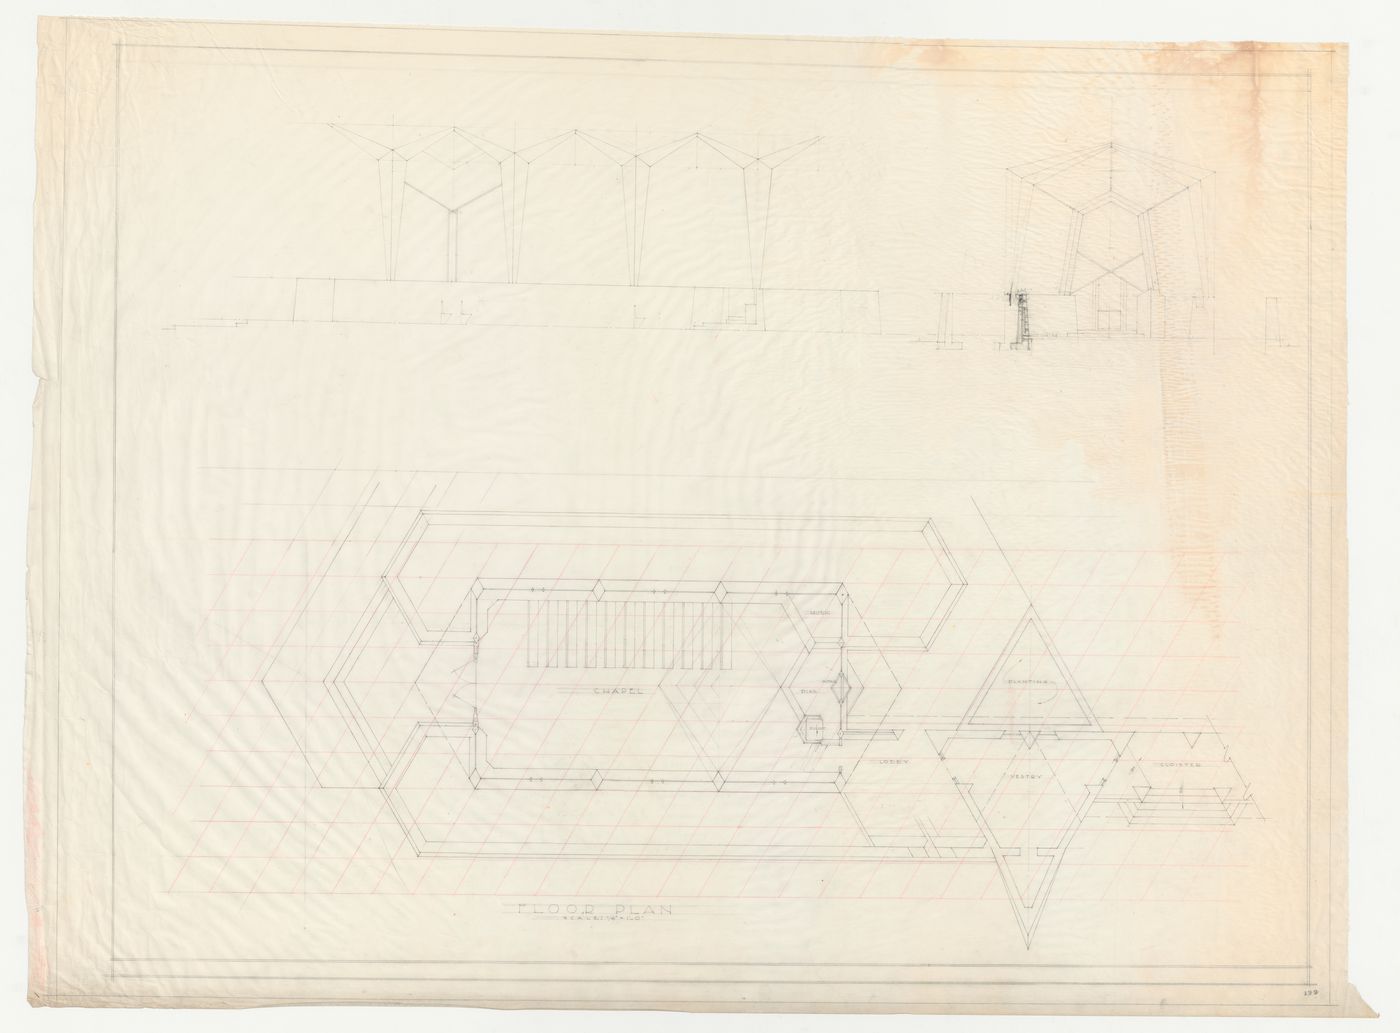 Wayfarers' Chapel, Palos Verdes, California: Plan for chapel and campanile developed on an equilateral parallelogram grid and two sections through the chapel